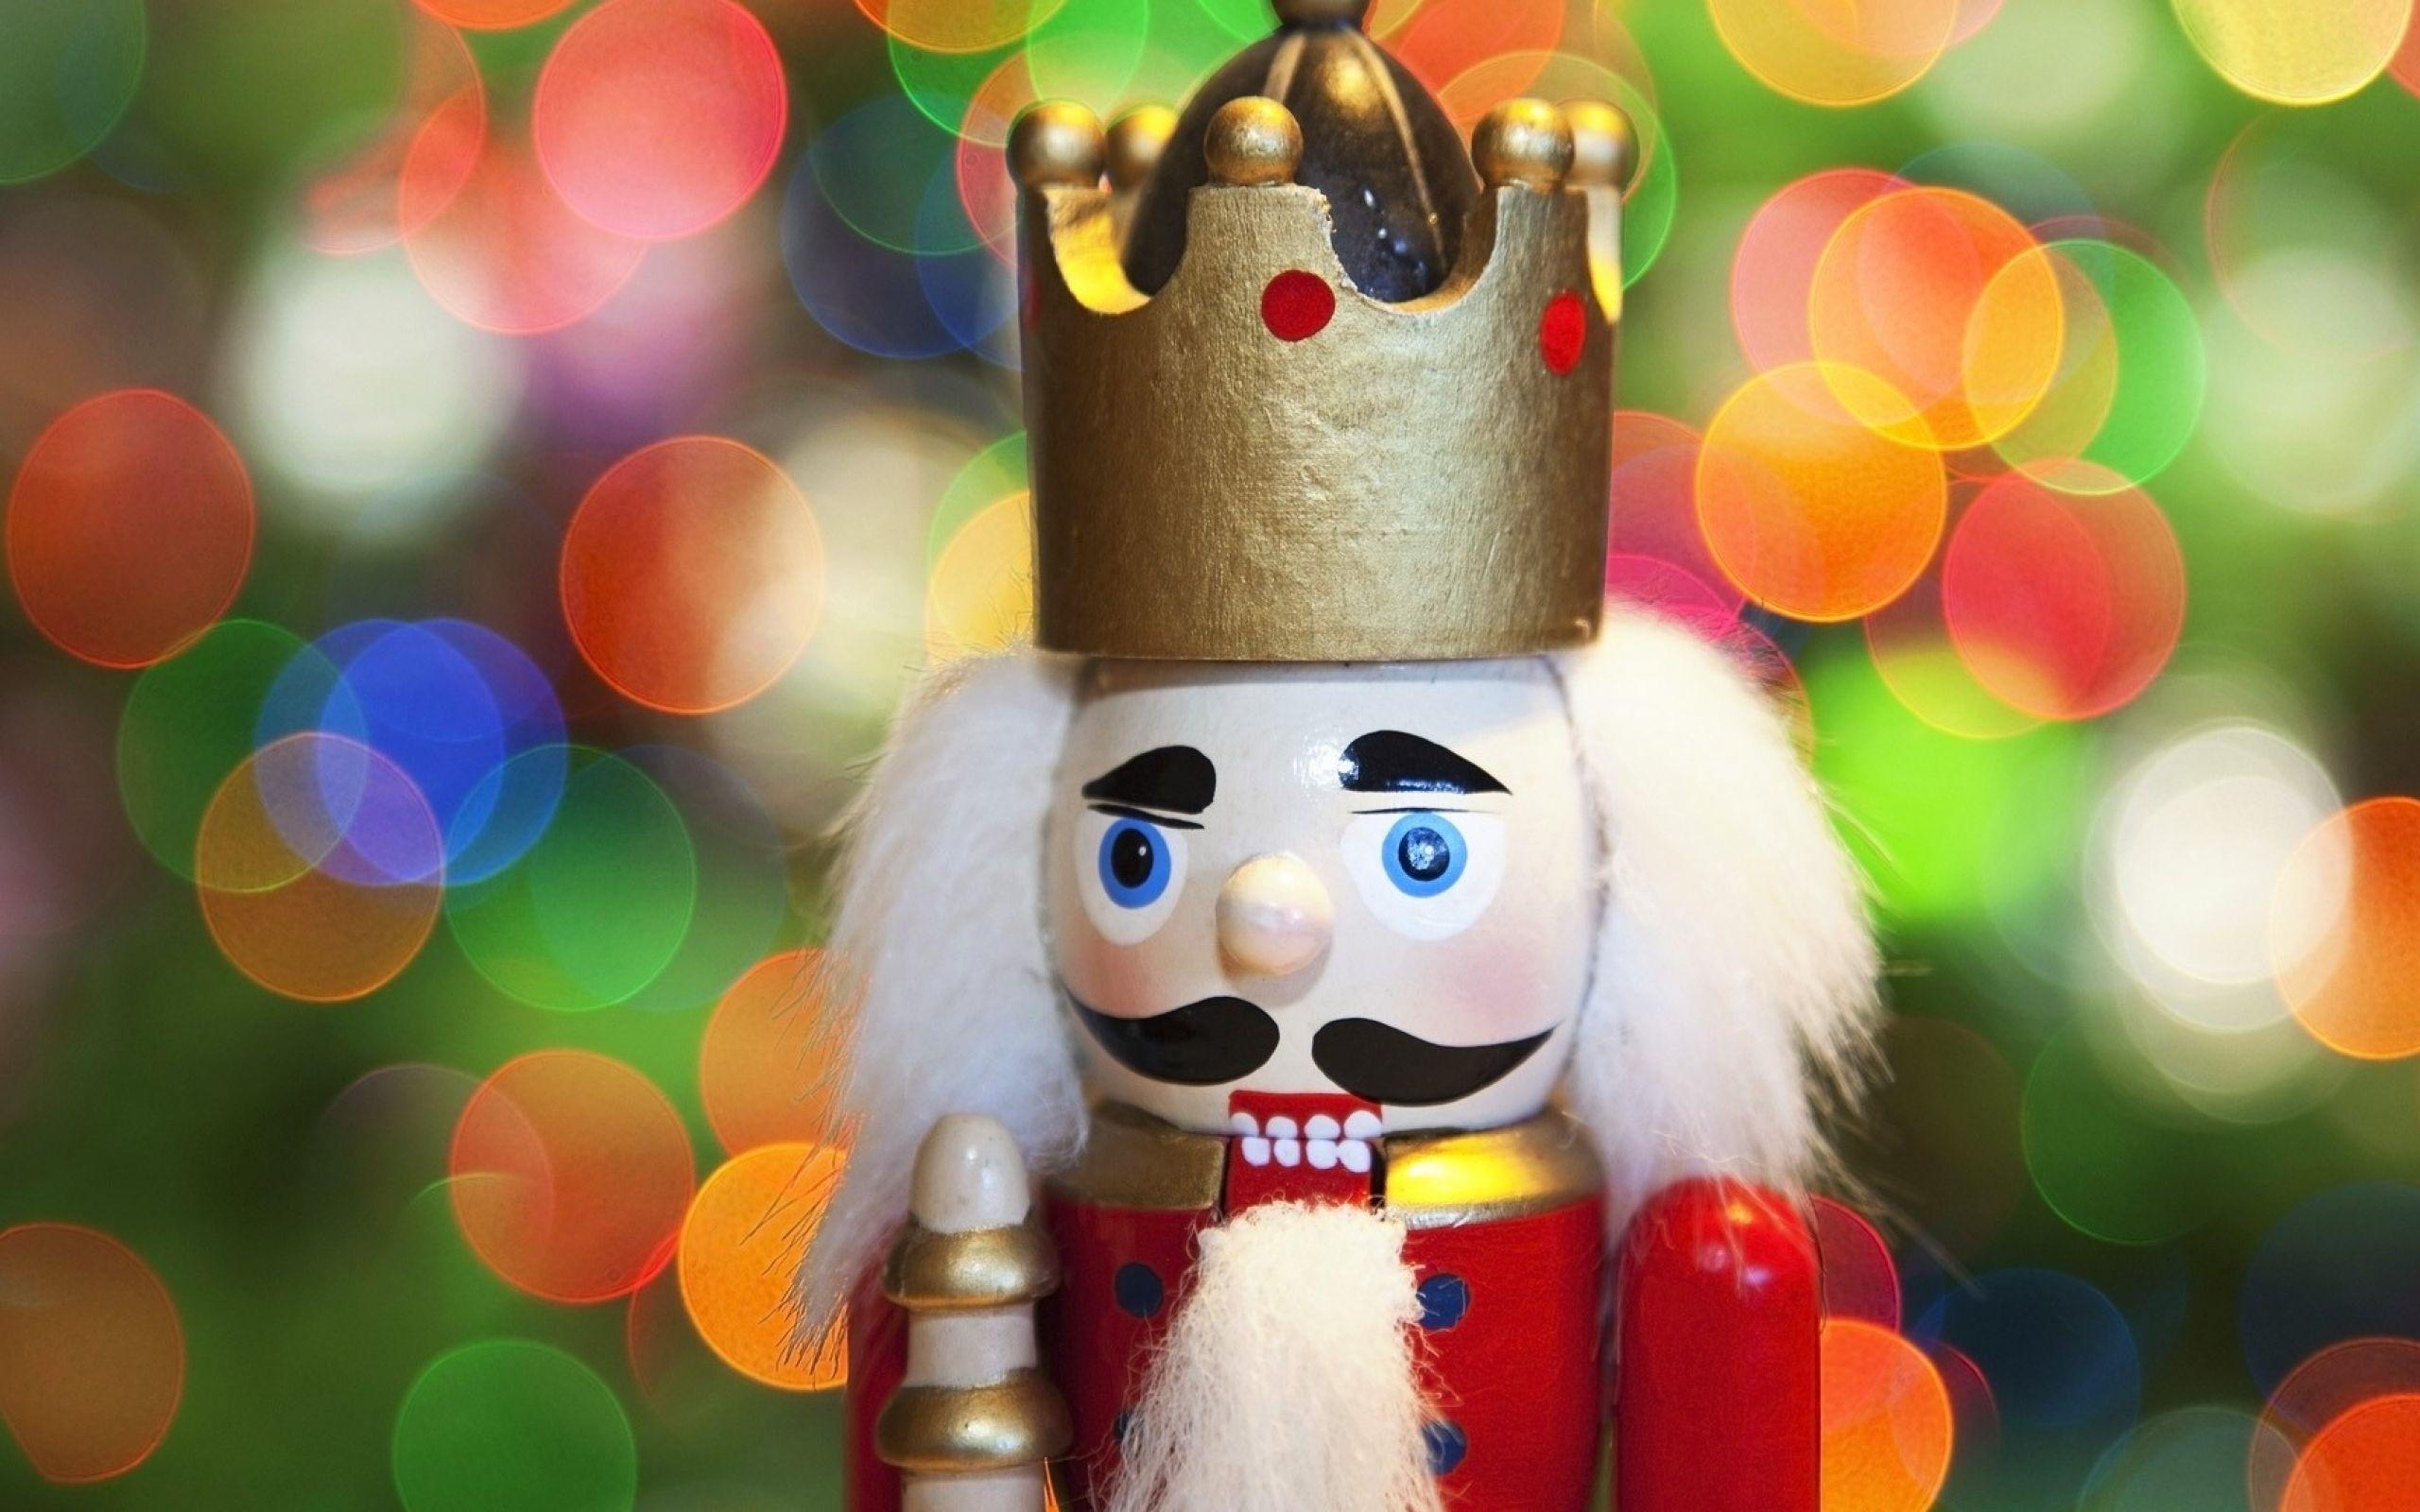 Nutcracker: Hand-carved wooden figure, A toy soldier, A common German Christmas tradition. 2560x1600 HD Background.